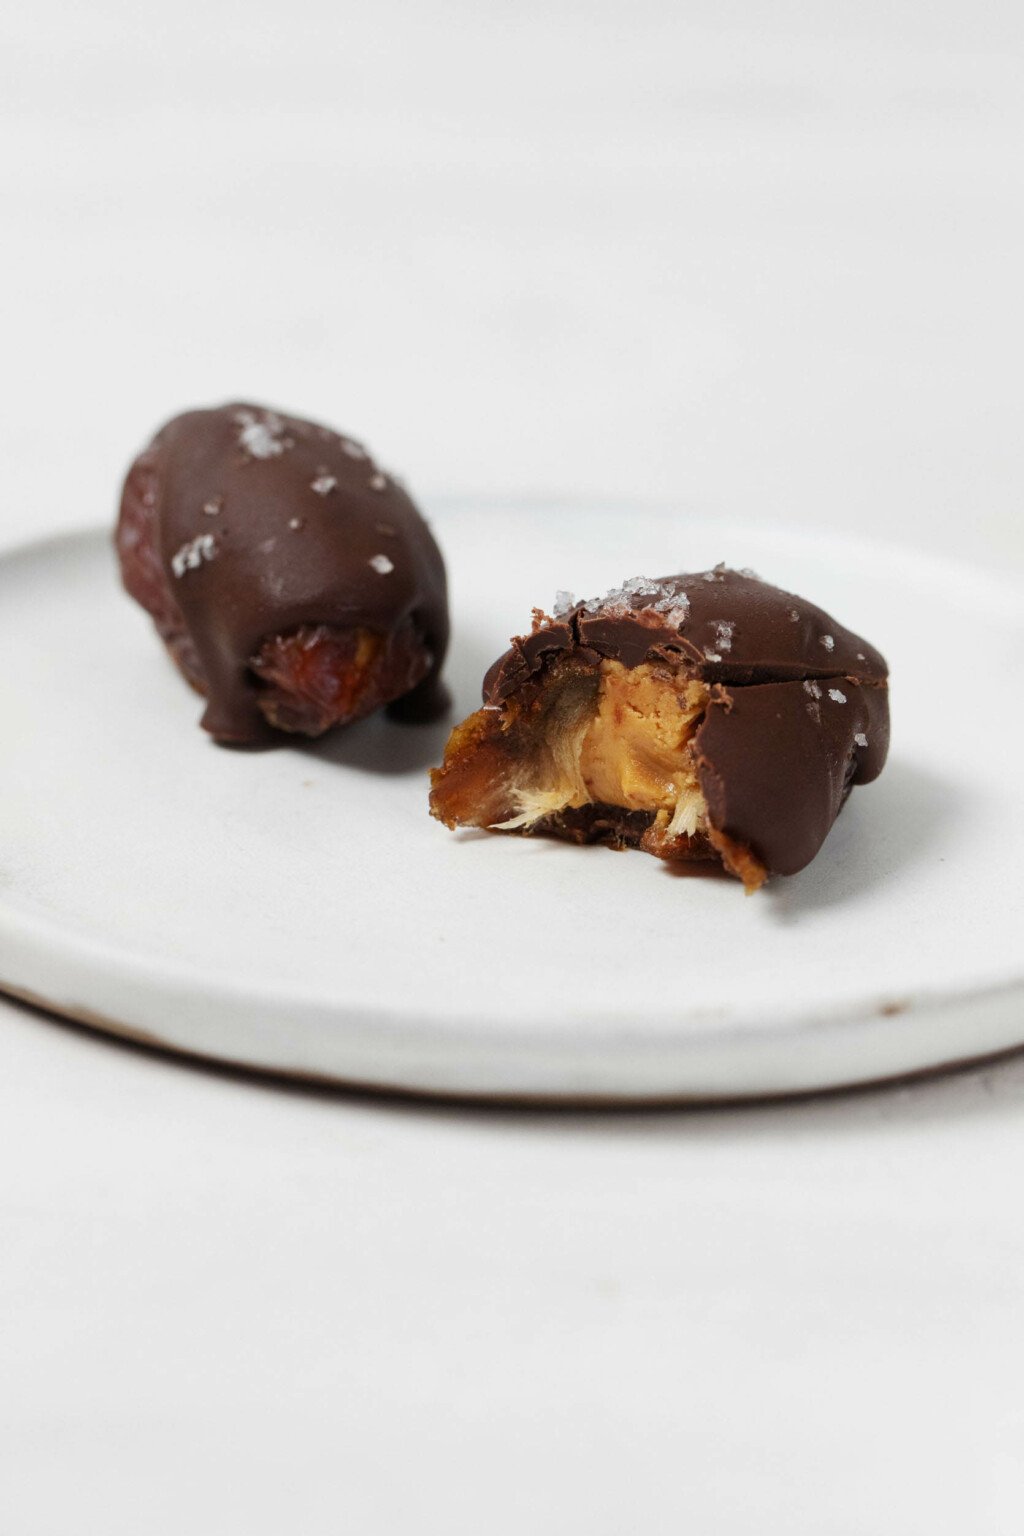 A peanut butter stuffed Medjool date has been topped with chocolate and sea salt. It rests on a white plate.